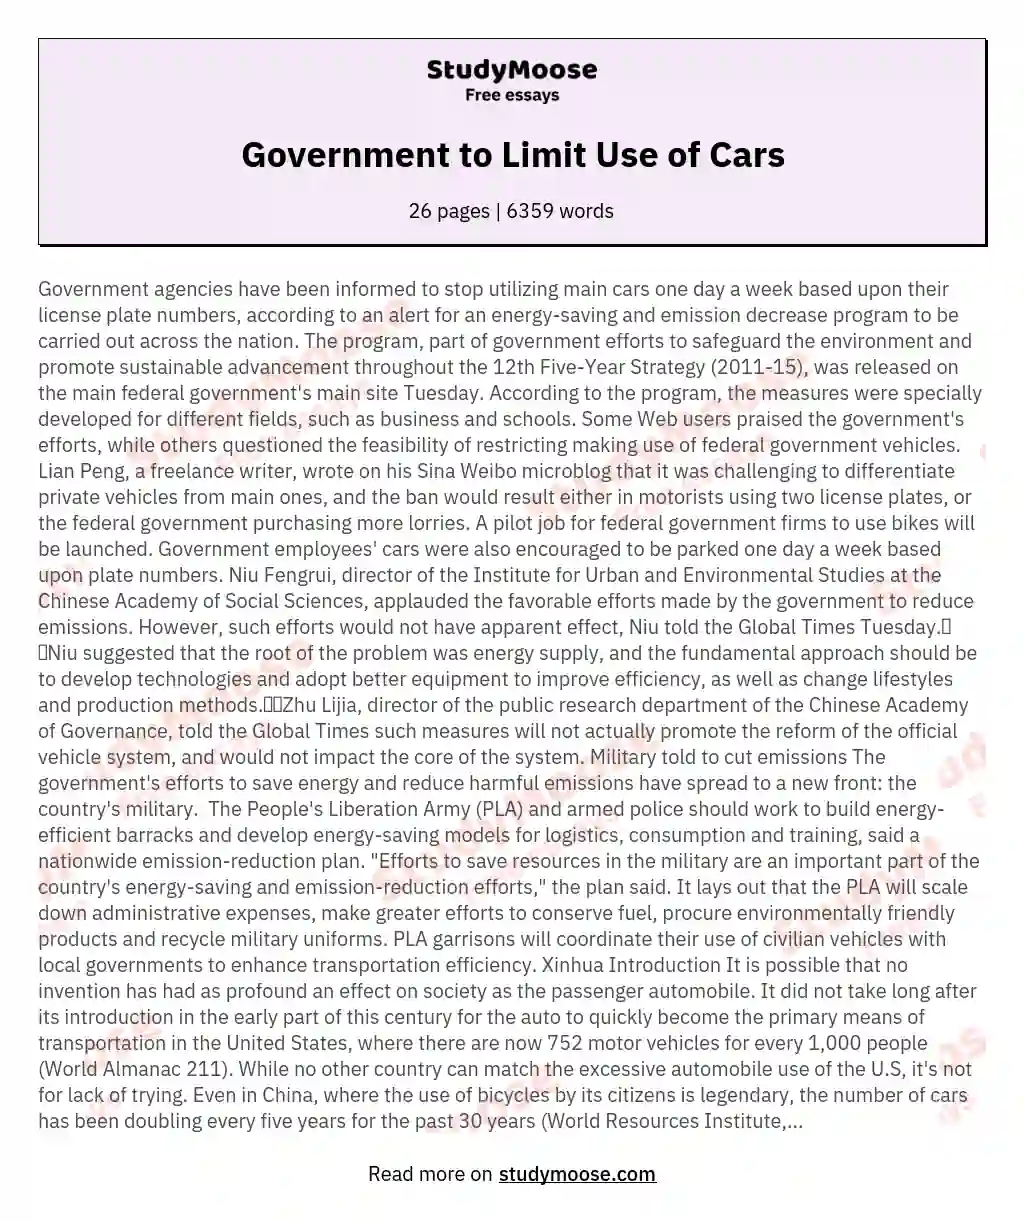 Government to Limit Use of Cars essay